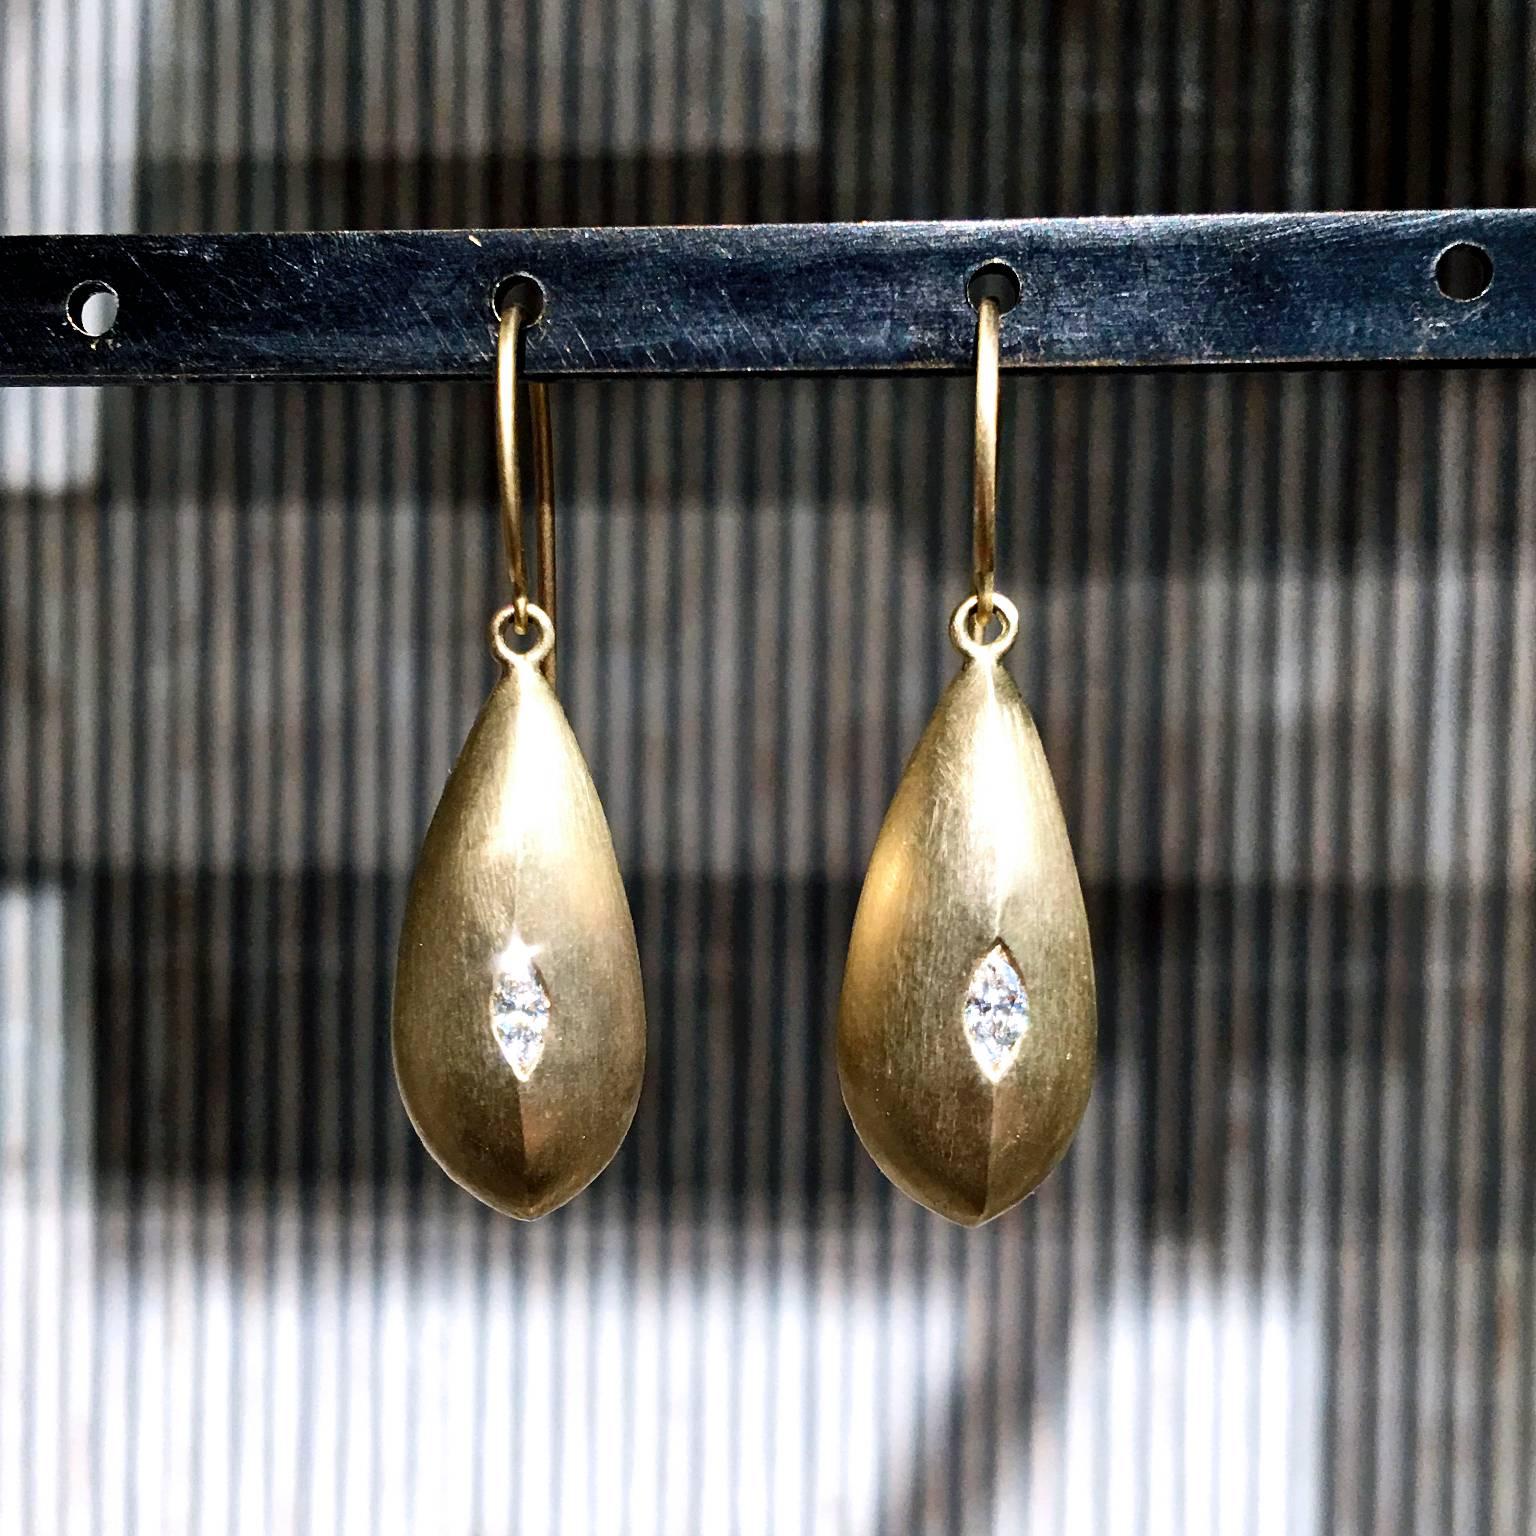 Teardrop Earrings handcrafted in soft matte and satin-finished 10k yellow gold with two bezel-set brilliant-cut marquise white diamonds totaling 0.50 carats.